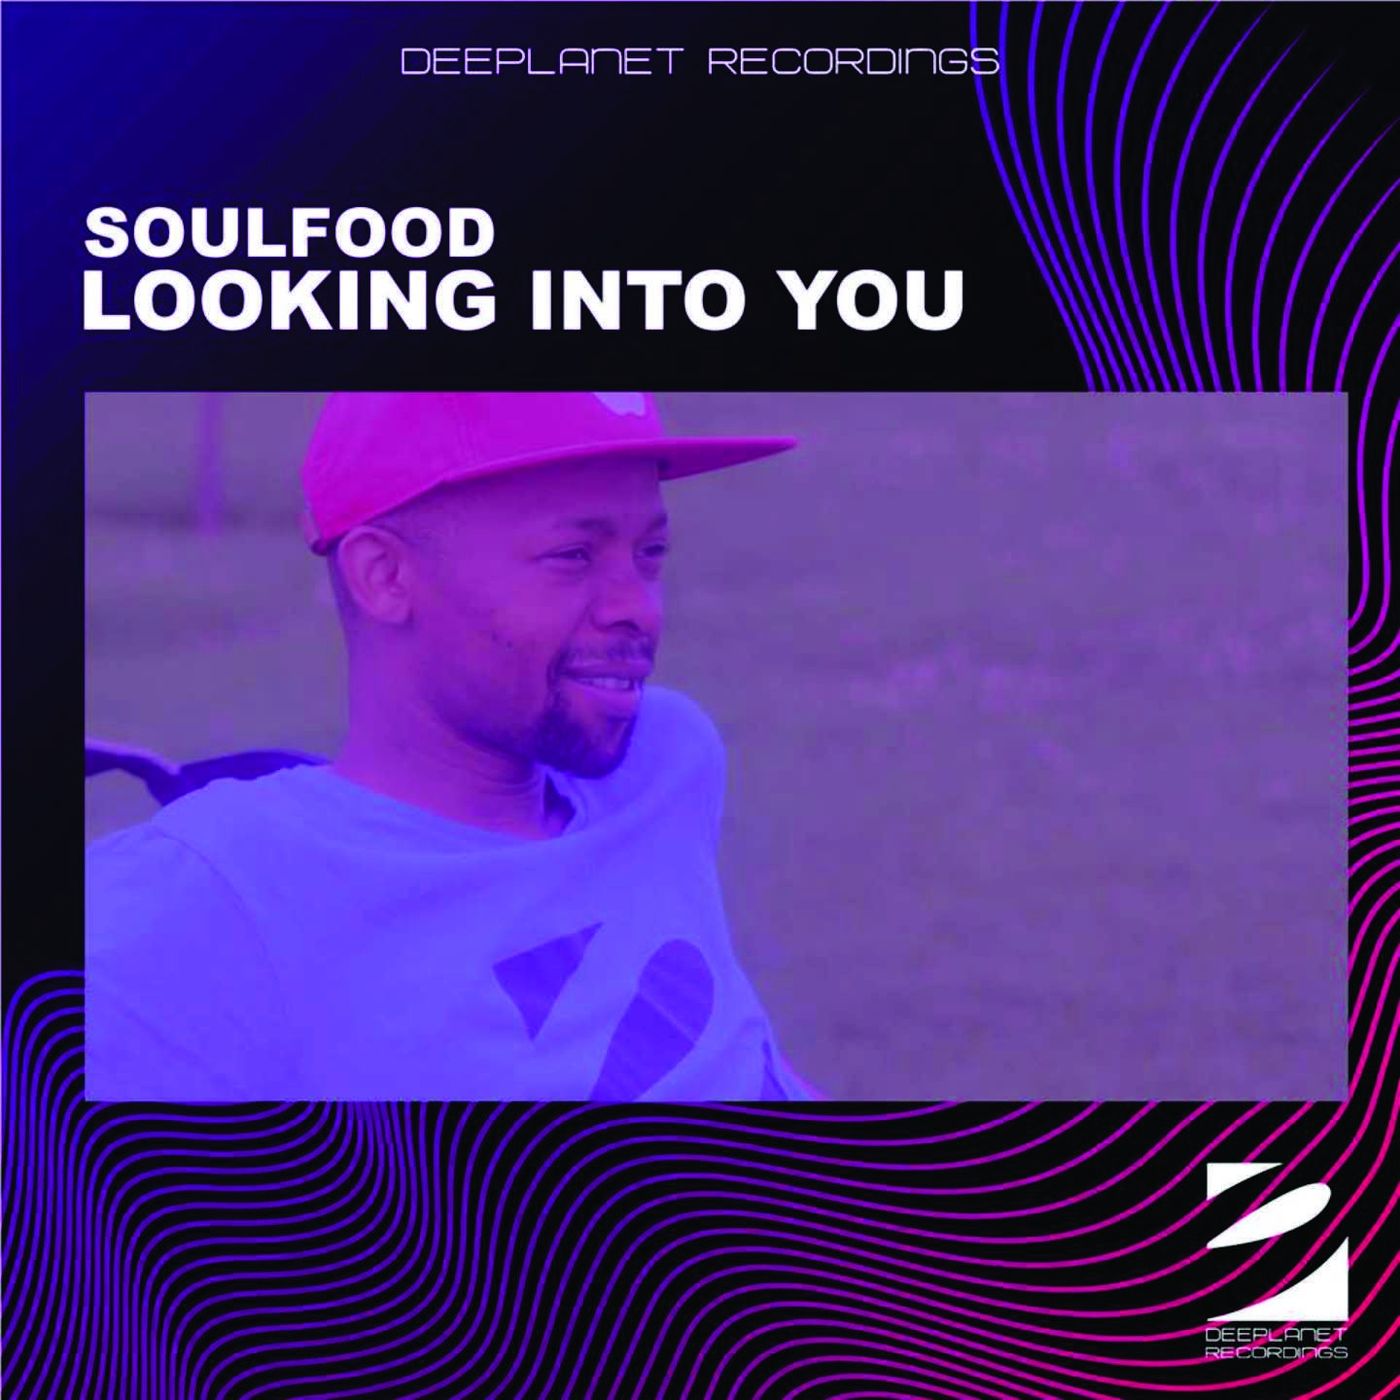 Soulfood - Looking into You / Deeplanet Recordings